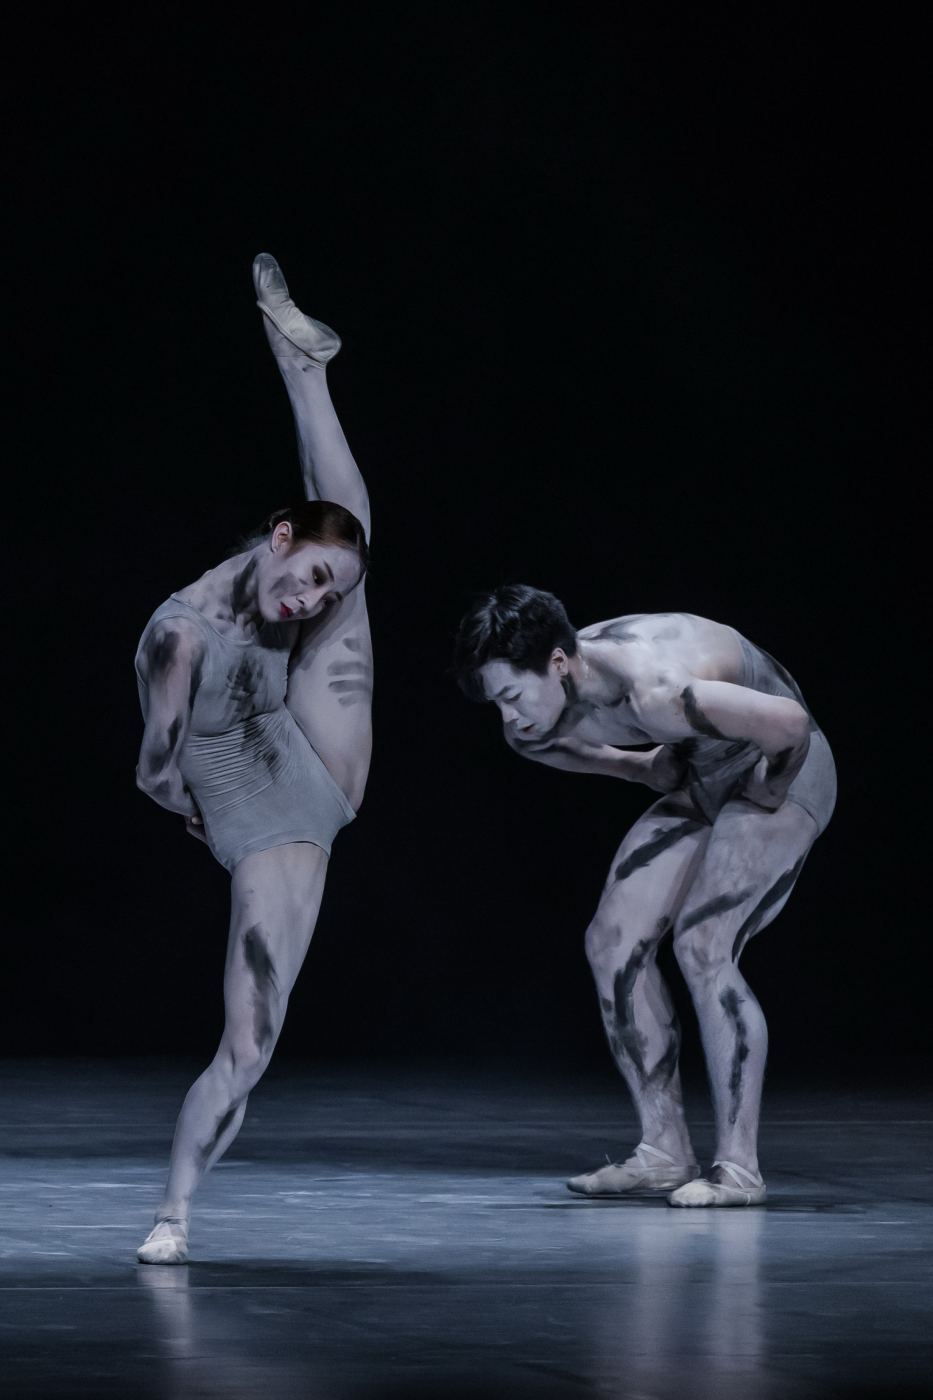 3. Y.Lee and M.Kiyota, “Sad Case” by S.León and P.Lightfoot, Ballet of the Hungarian State Opera 2022 © A.Nagy / Hungarian State Opera 